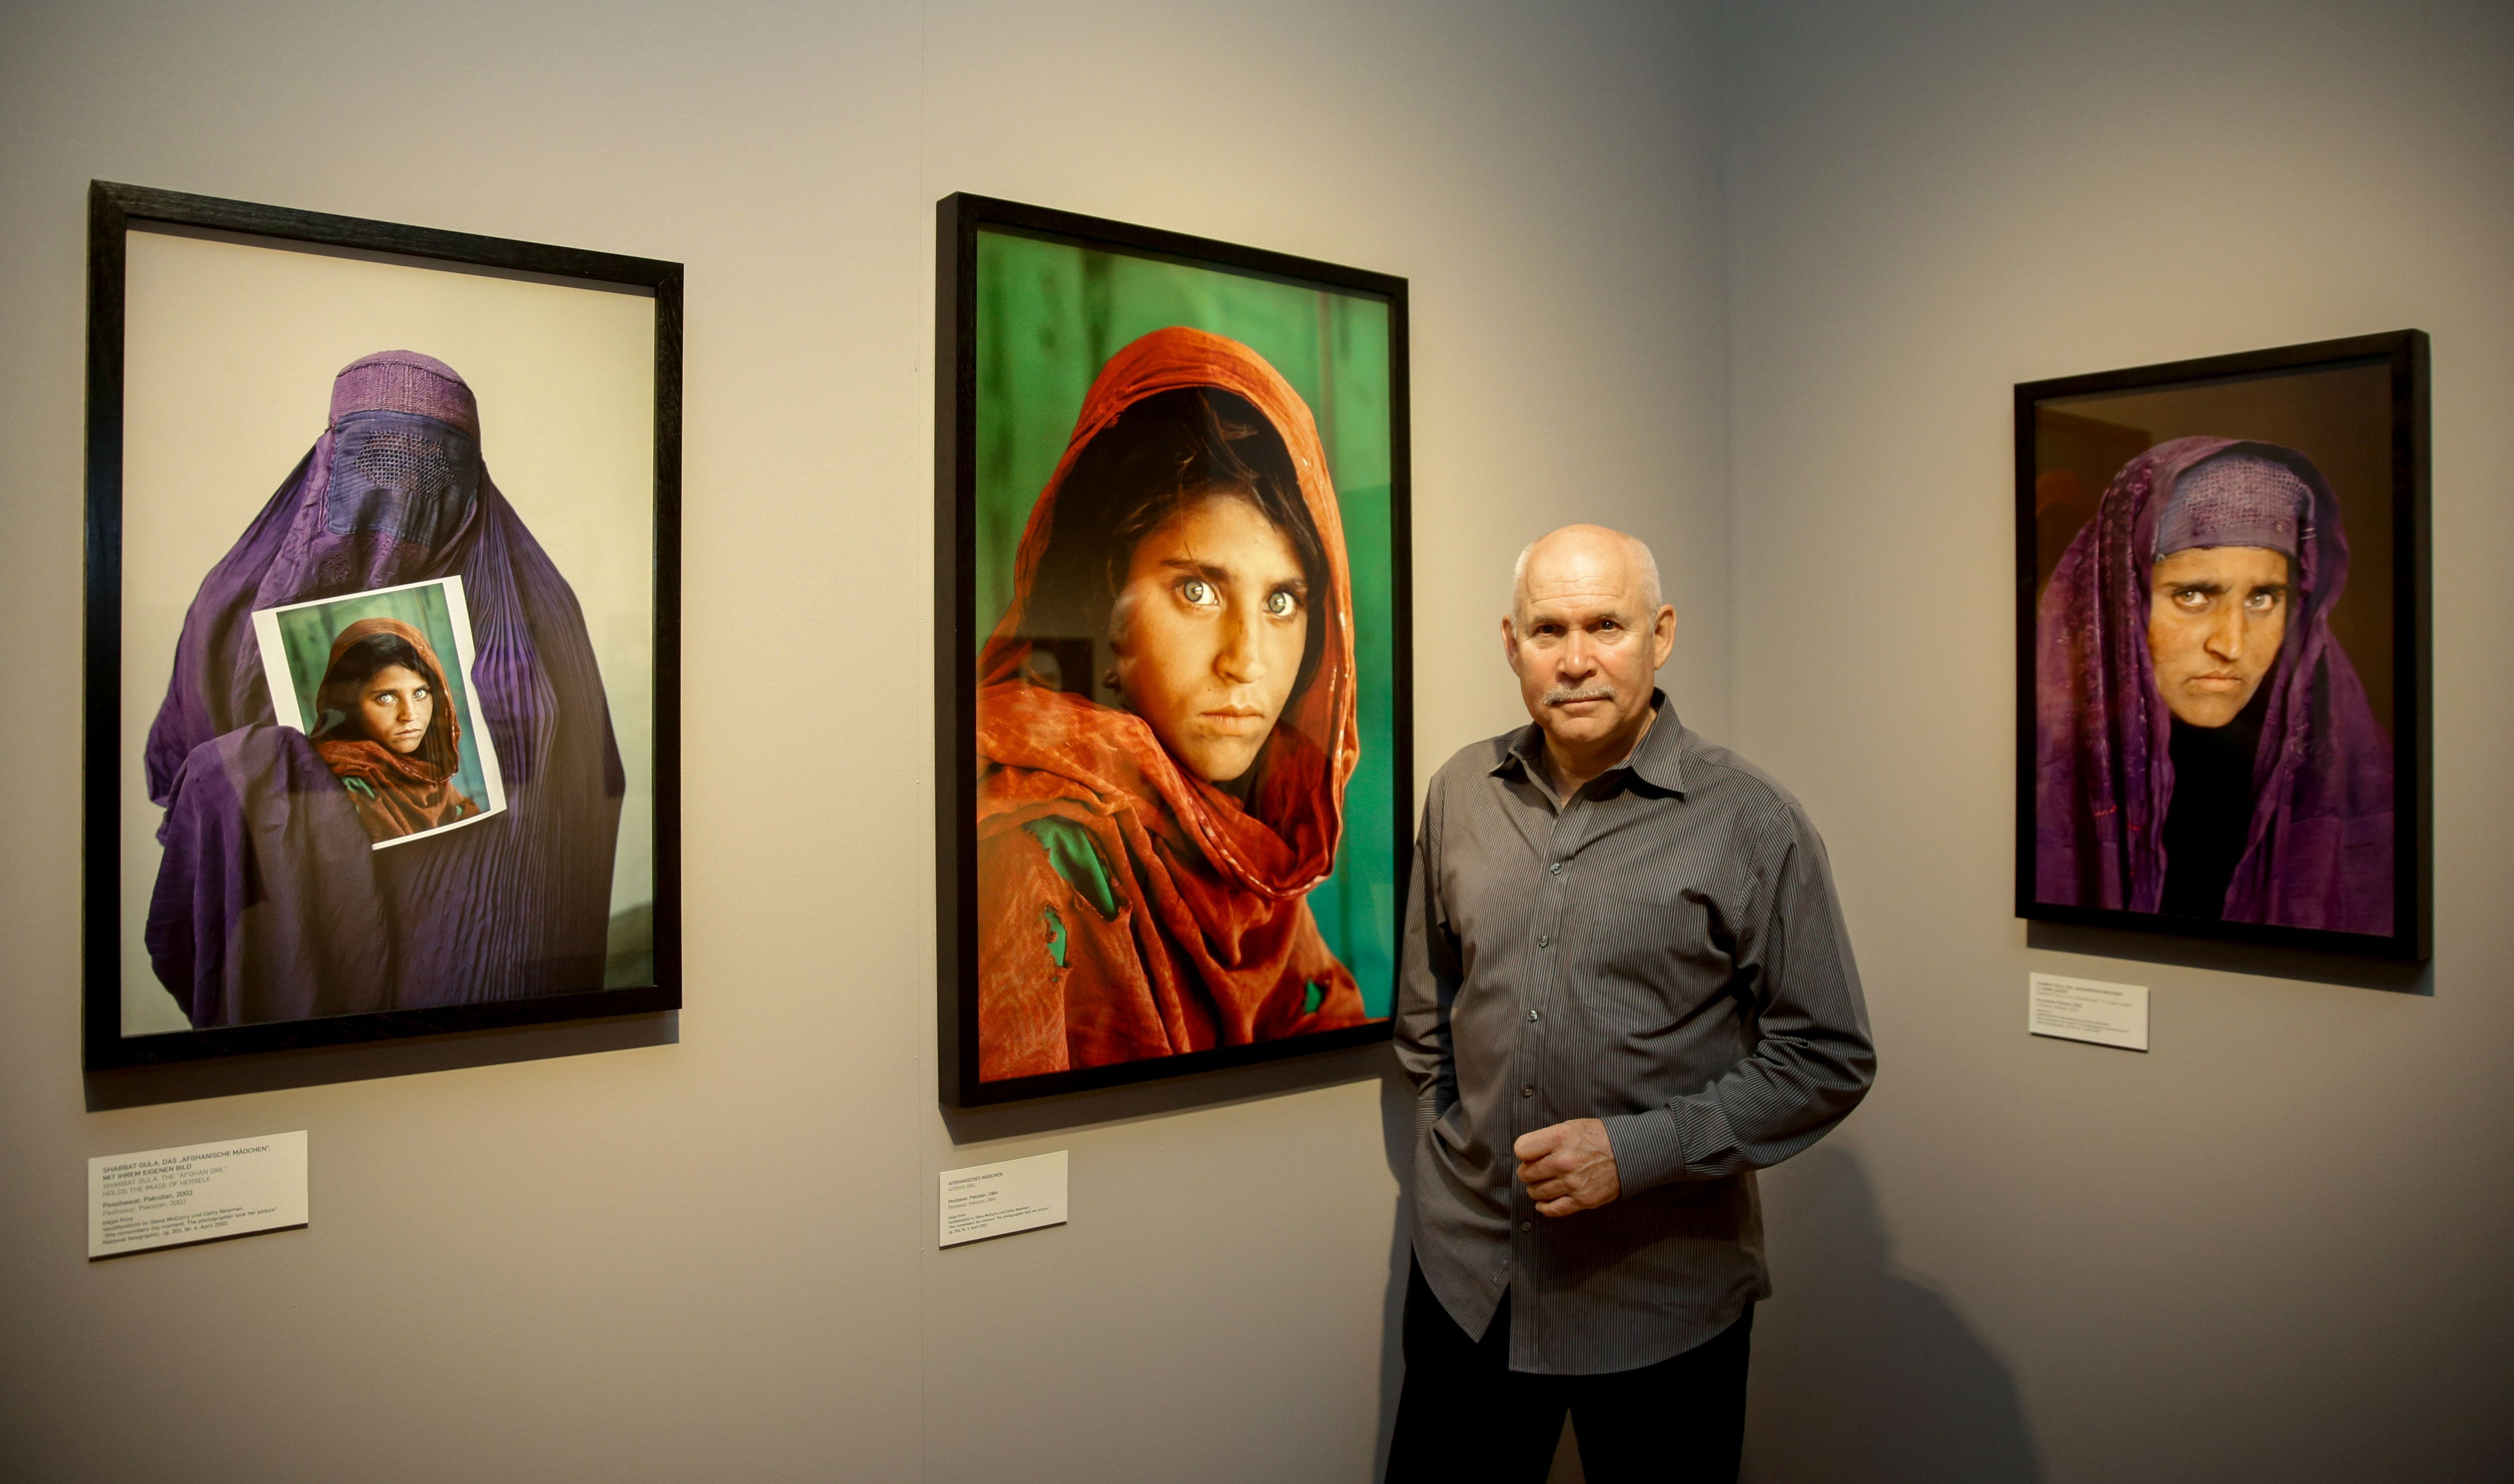 US photographer Steve McCurry poses next to his photos of the "Afghan Girl"